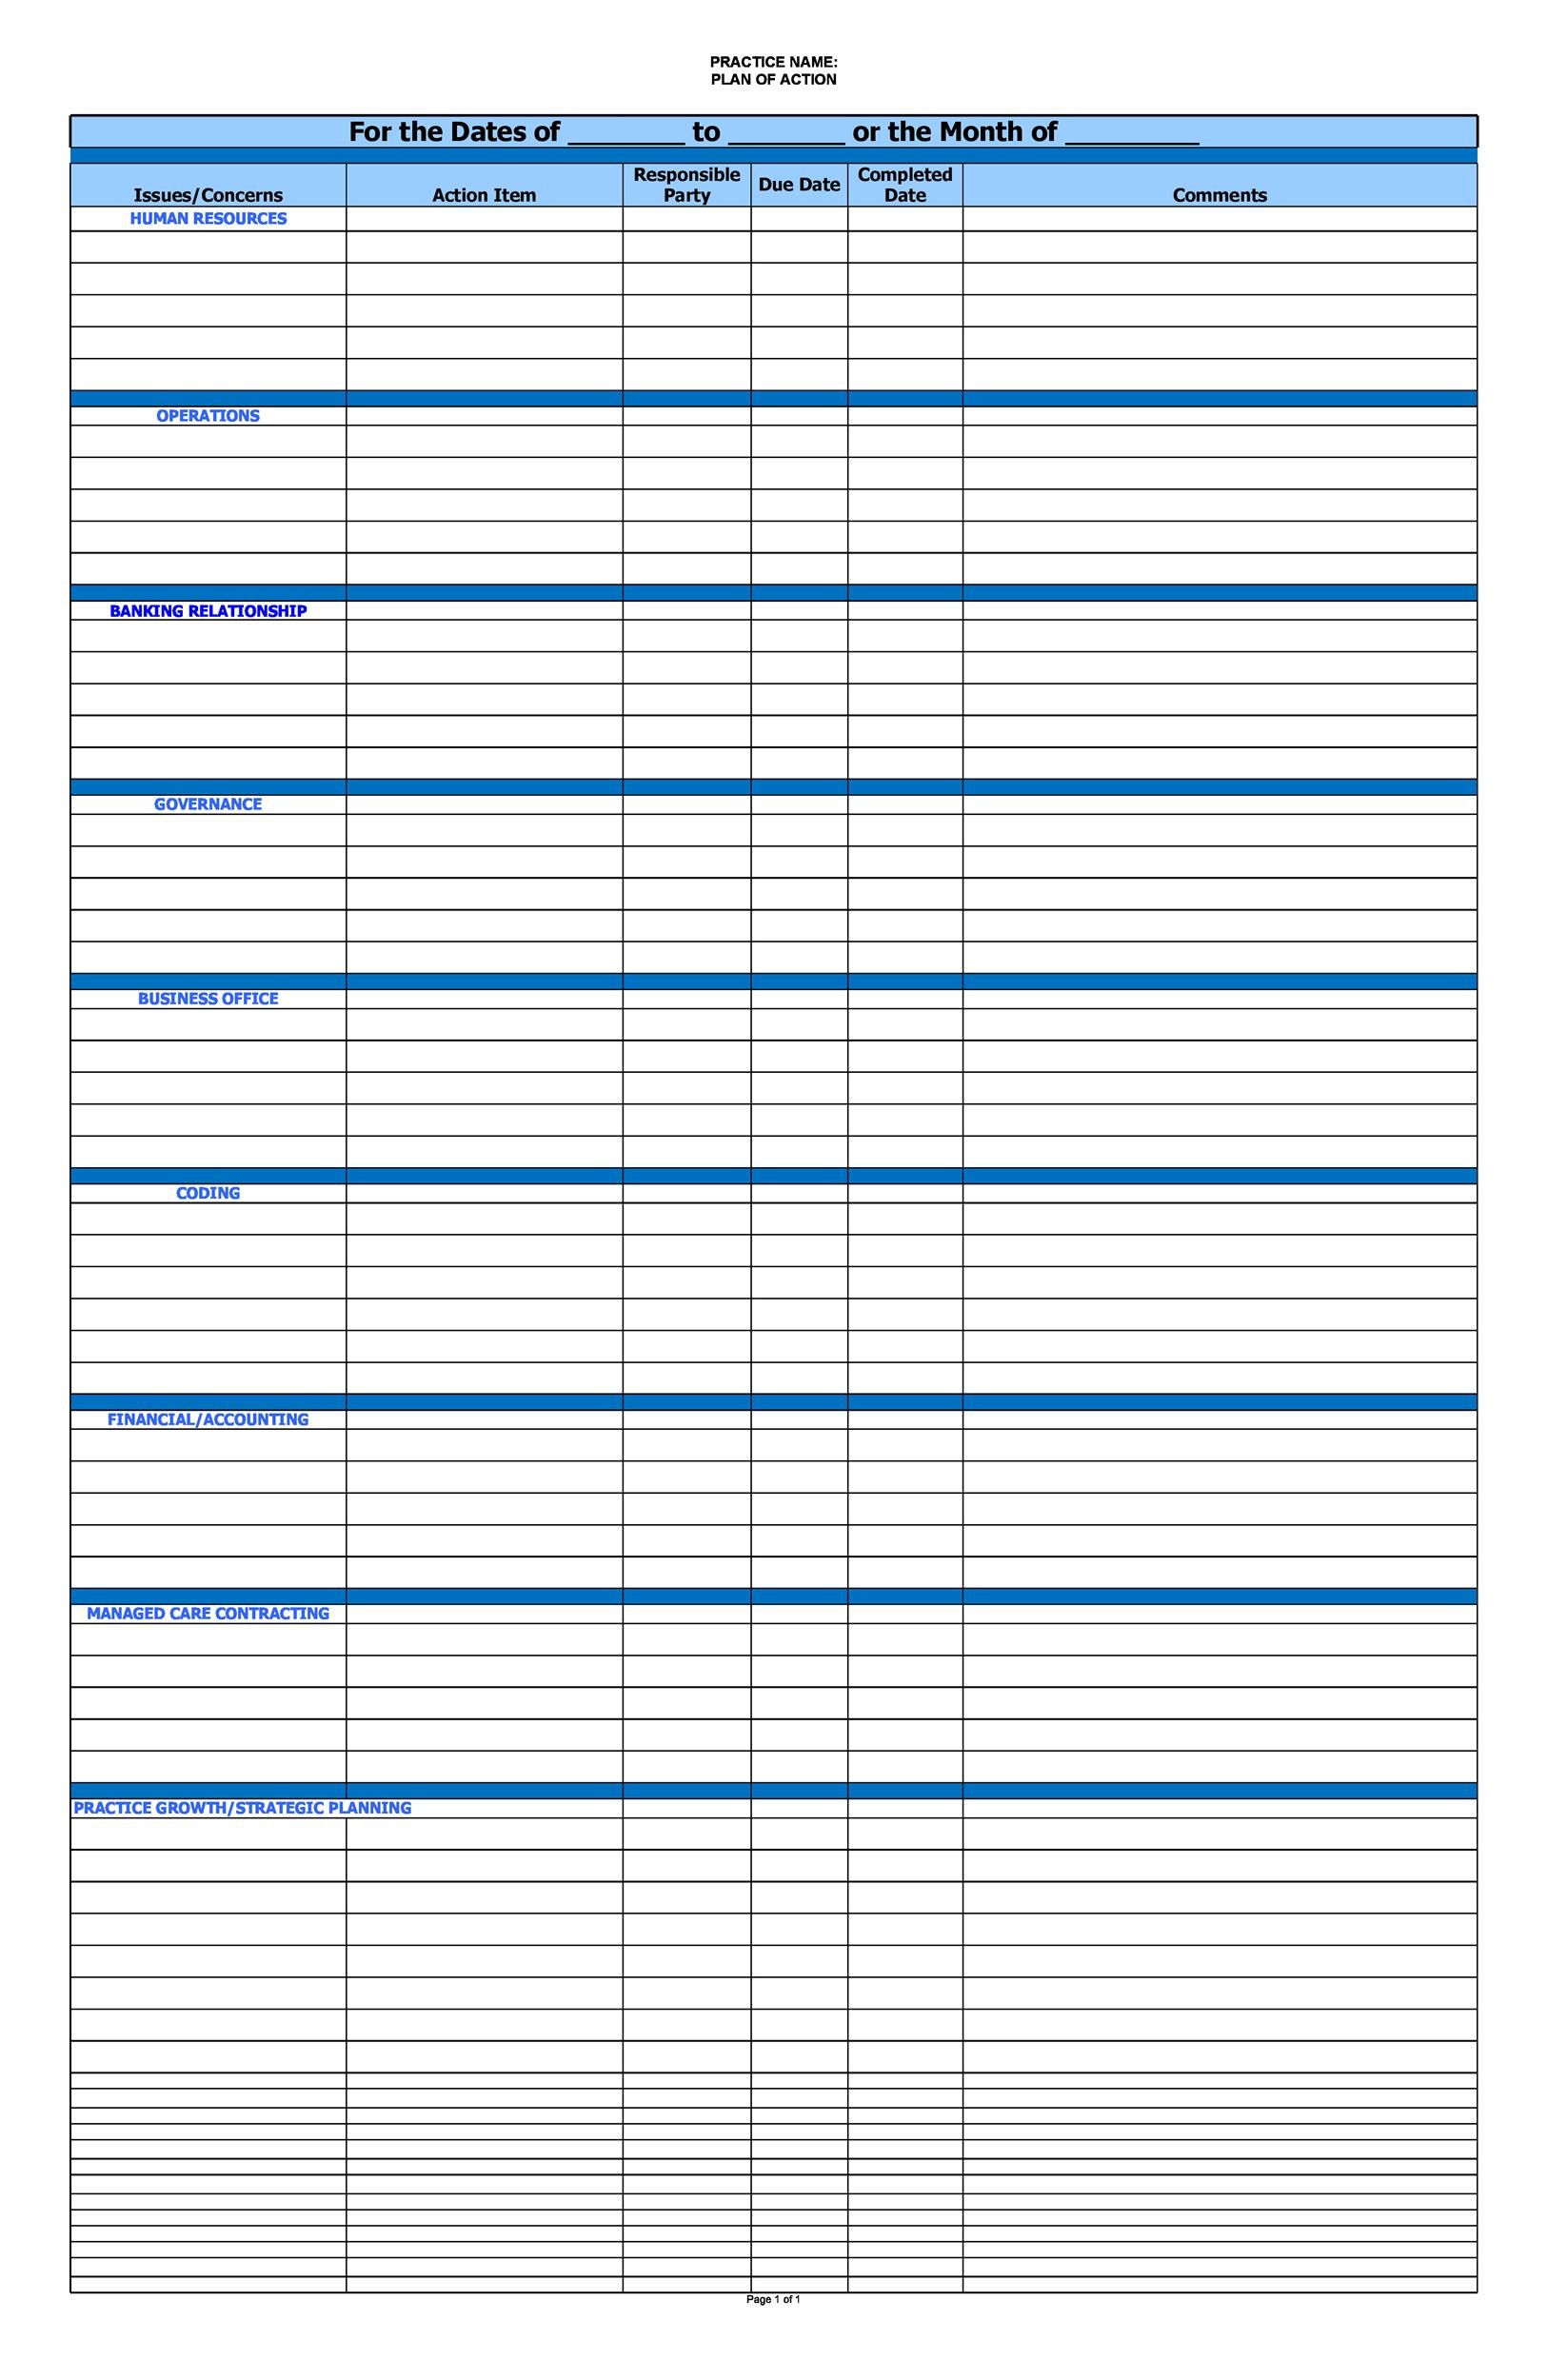 49-great-action-item-templates-ms-word-excel-templatelab